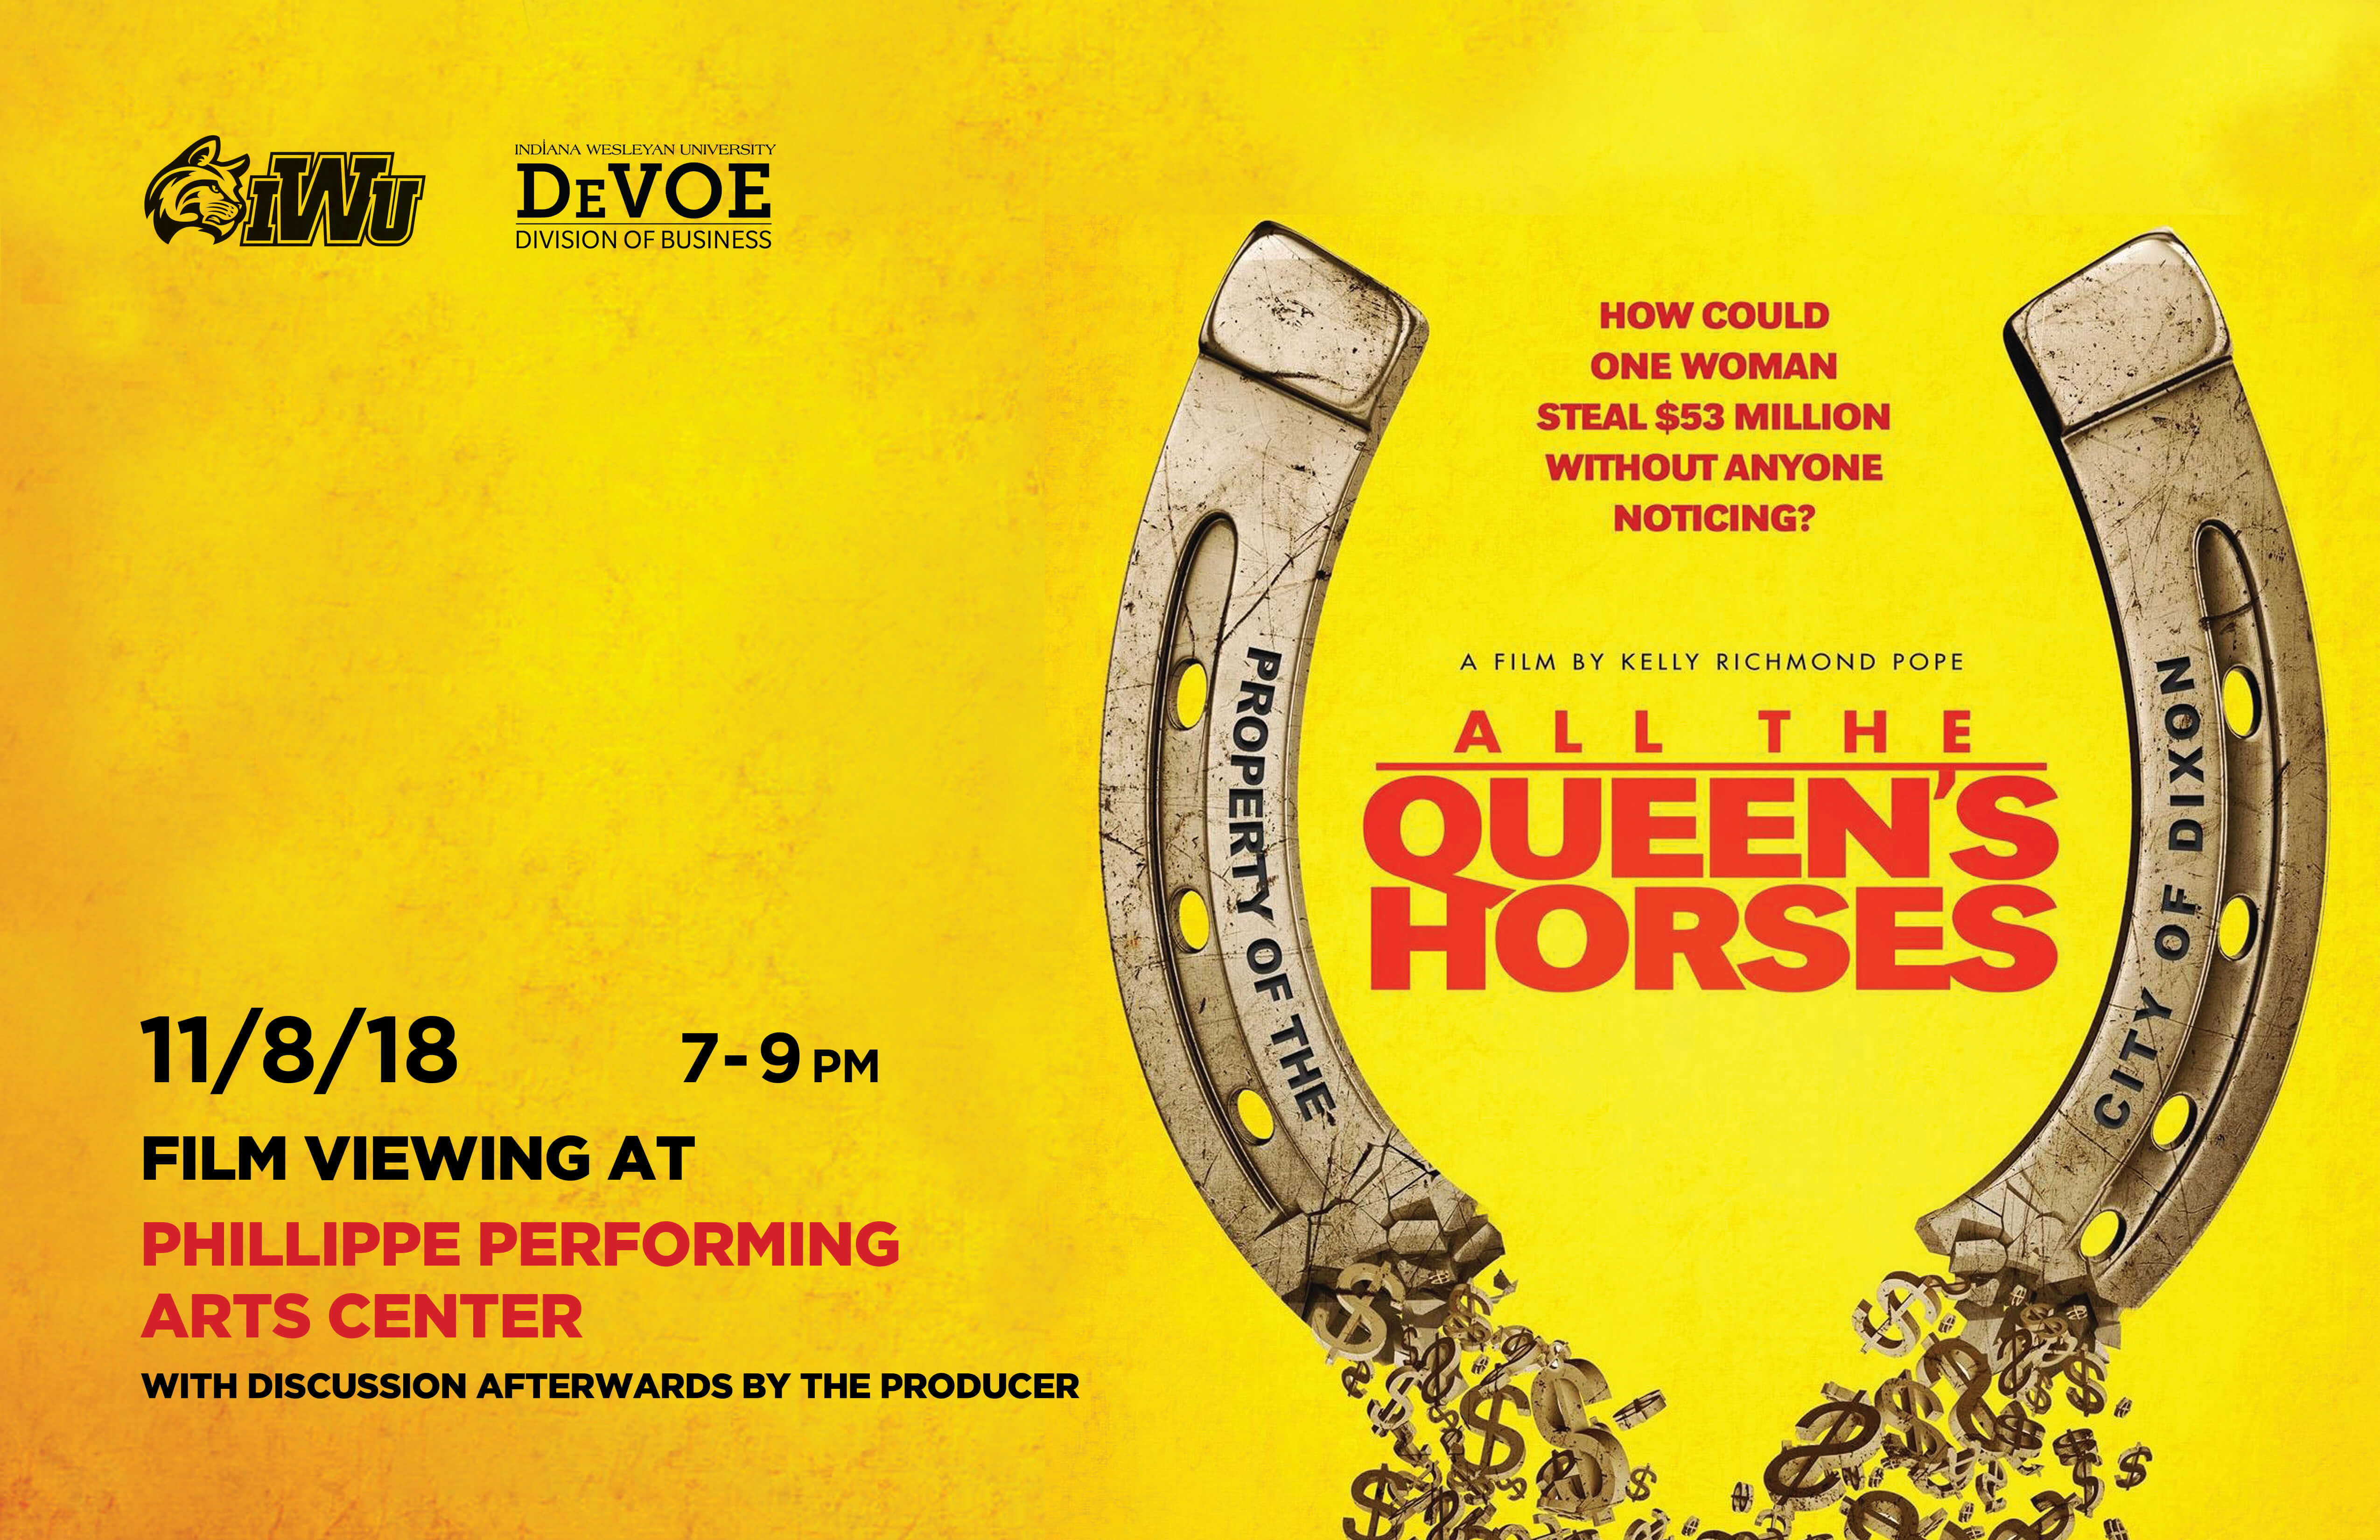 All the Queen's Horses film poster advertisement